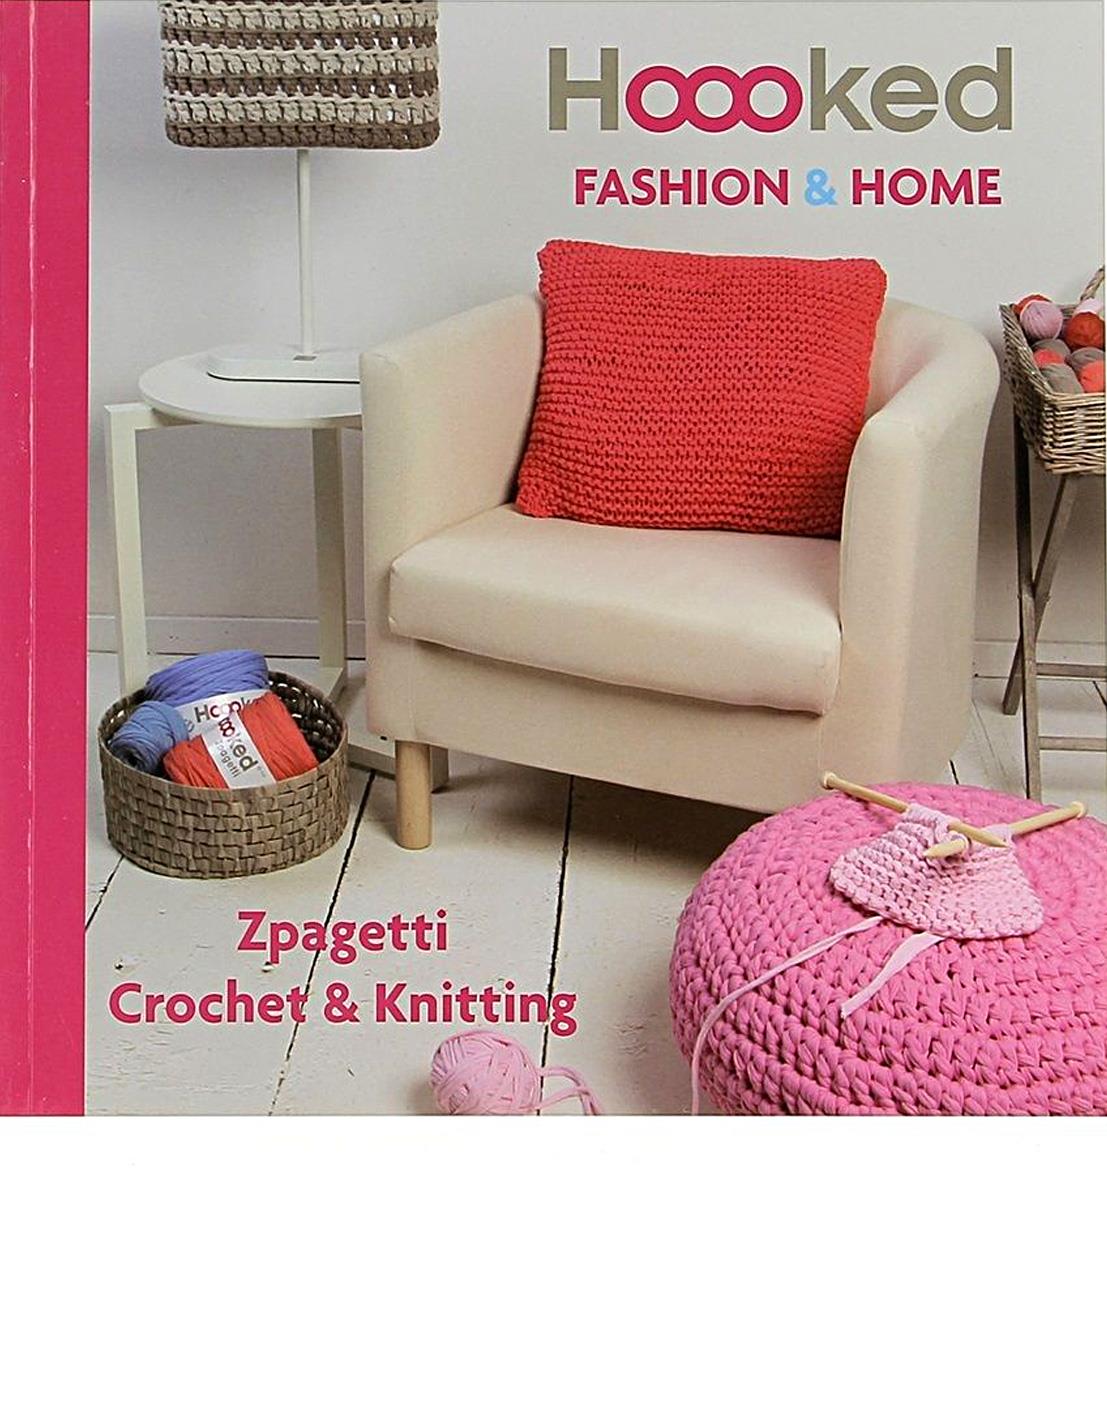 Hoooked Knitting & Crochet Book - Fashion and Home Patterns